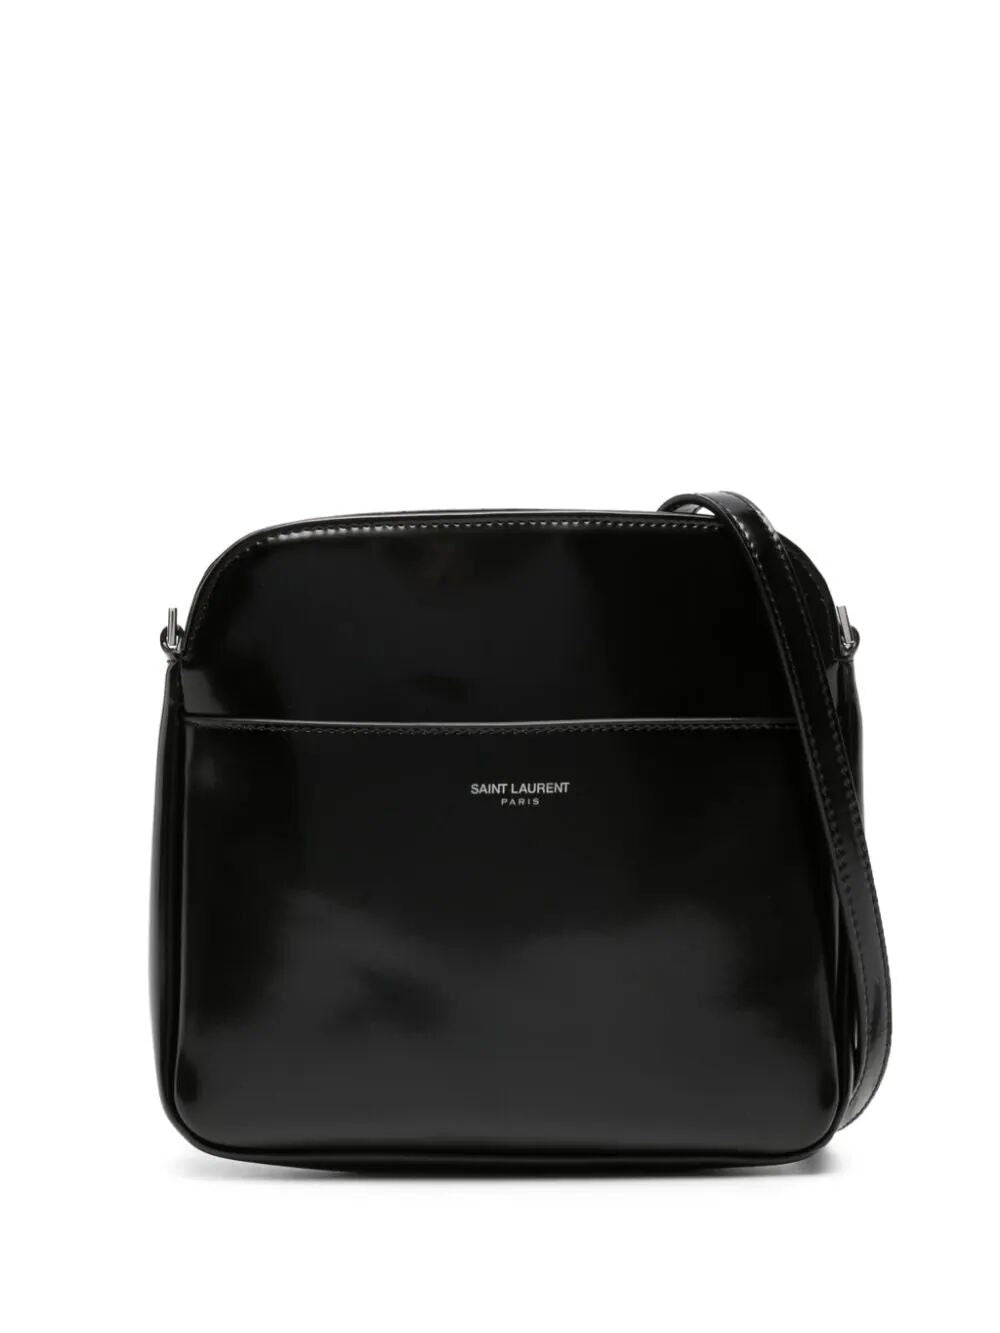 Saint Laurent Elevate Your Style With This Luxurious Leather Messenger Bag In Black